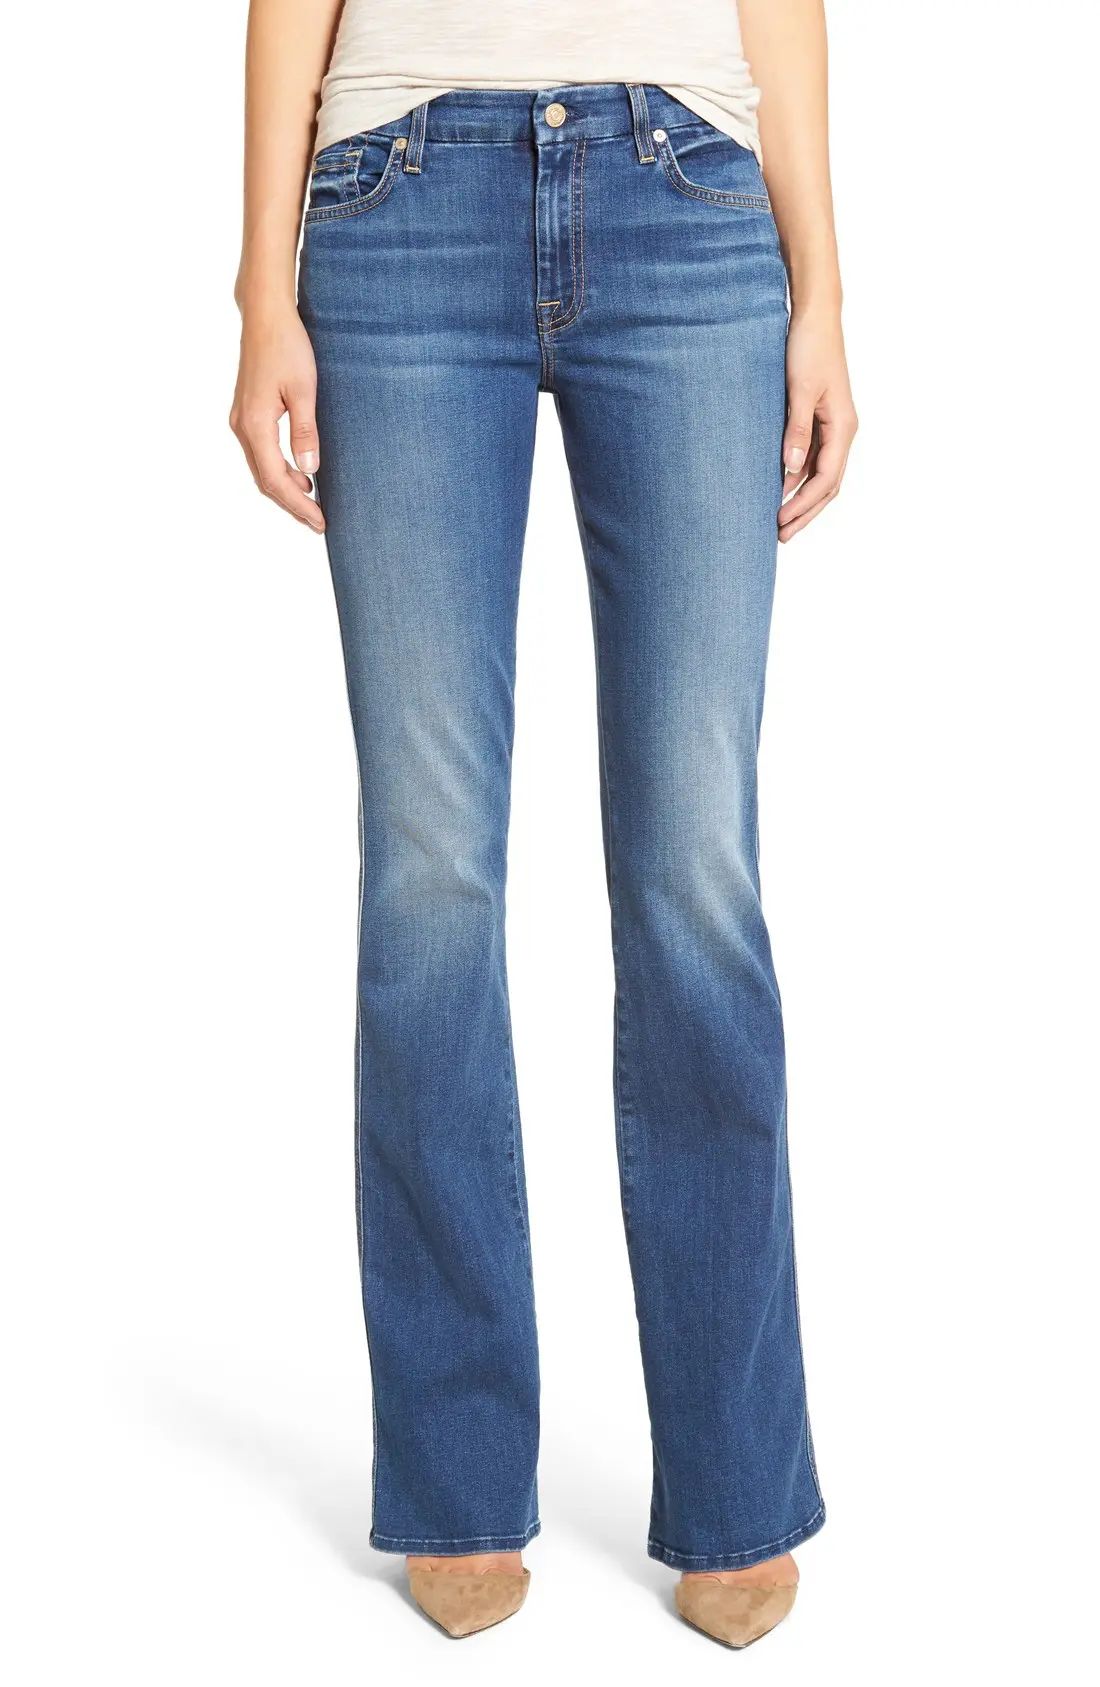 'b(air) - A Pocket' Flare Jeans | Nordstrom